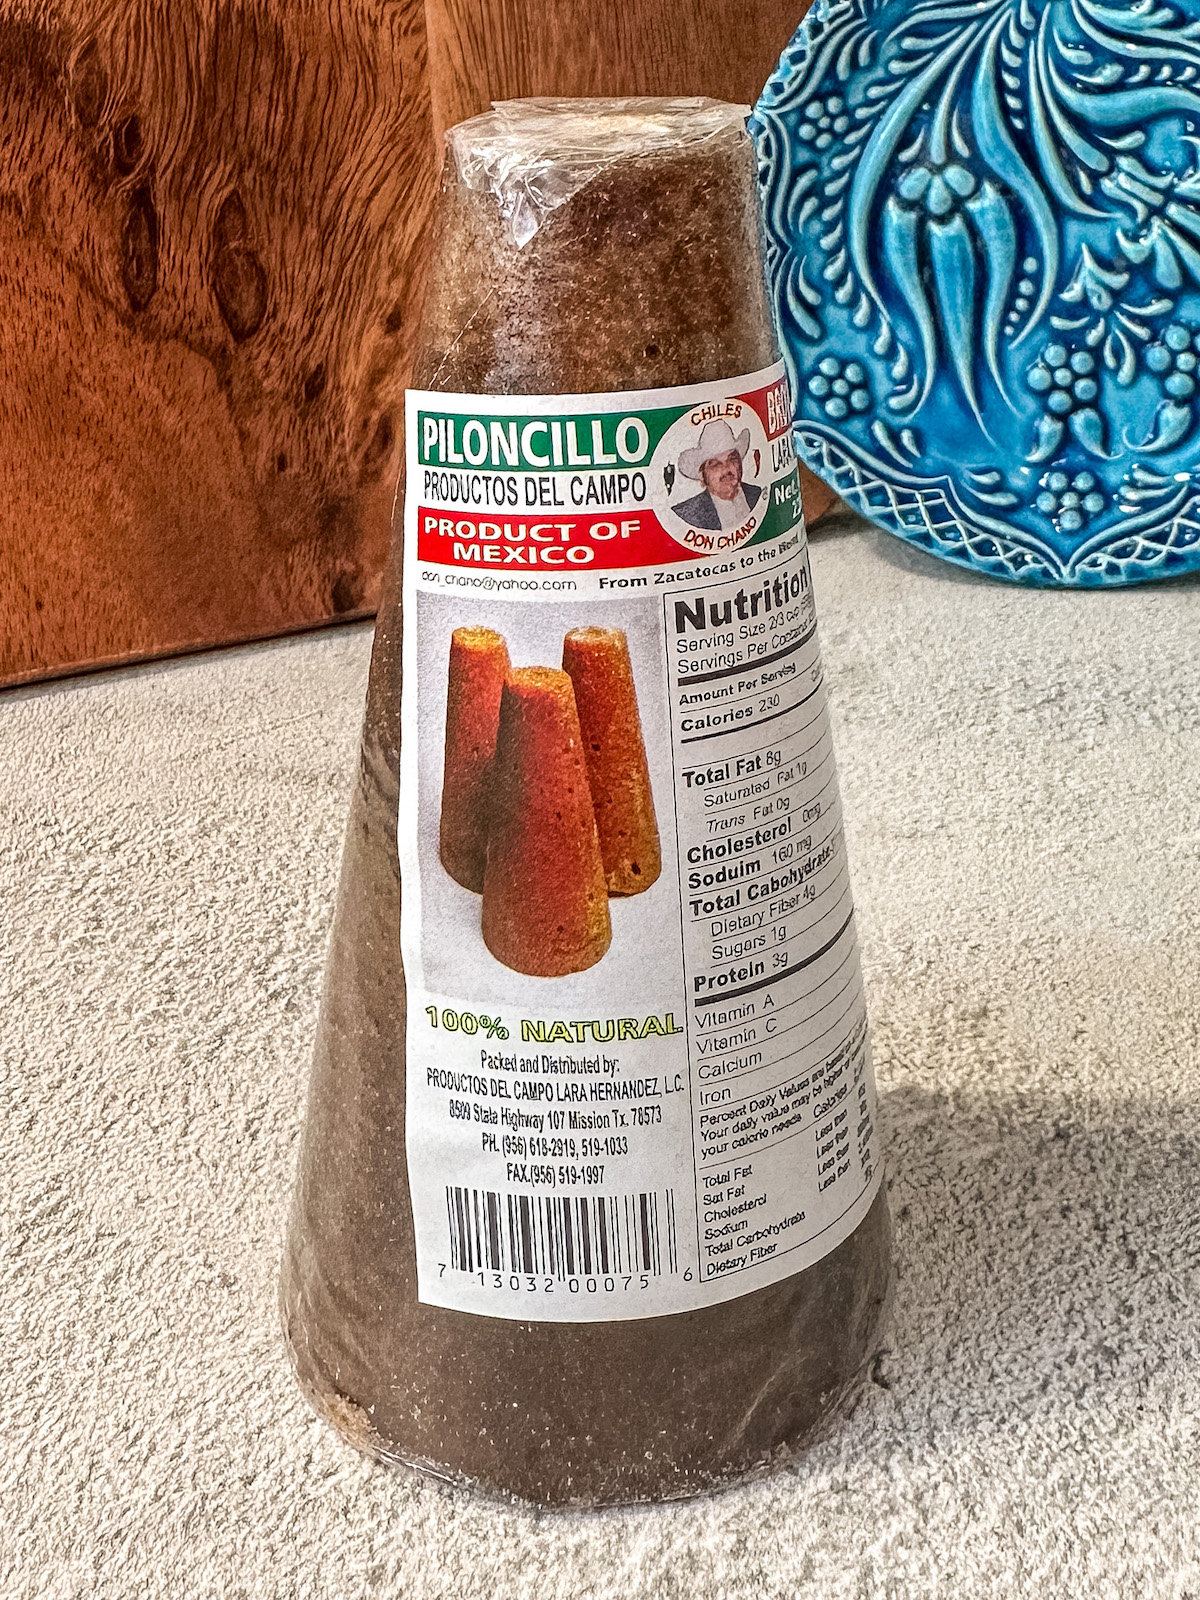 A wrapped Piloncillo cone with a brand label on it.